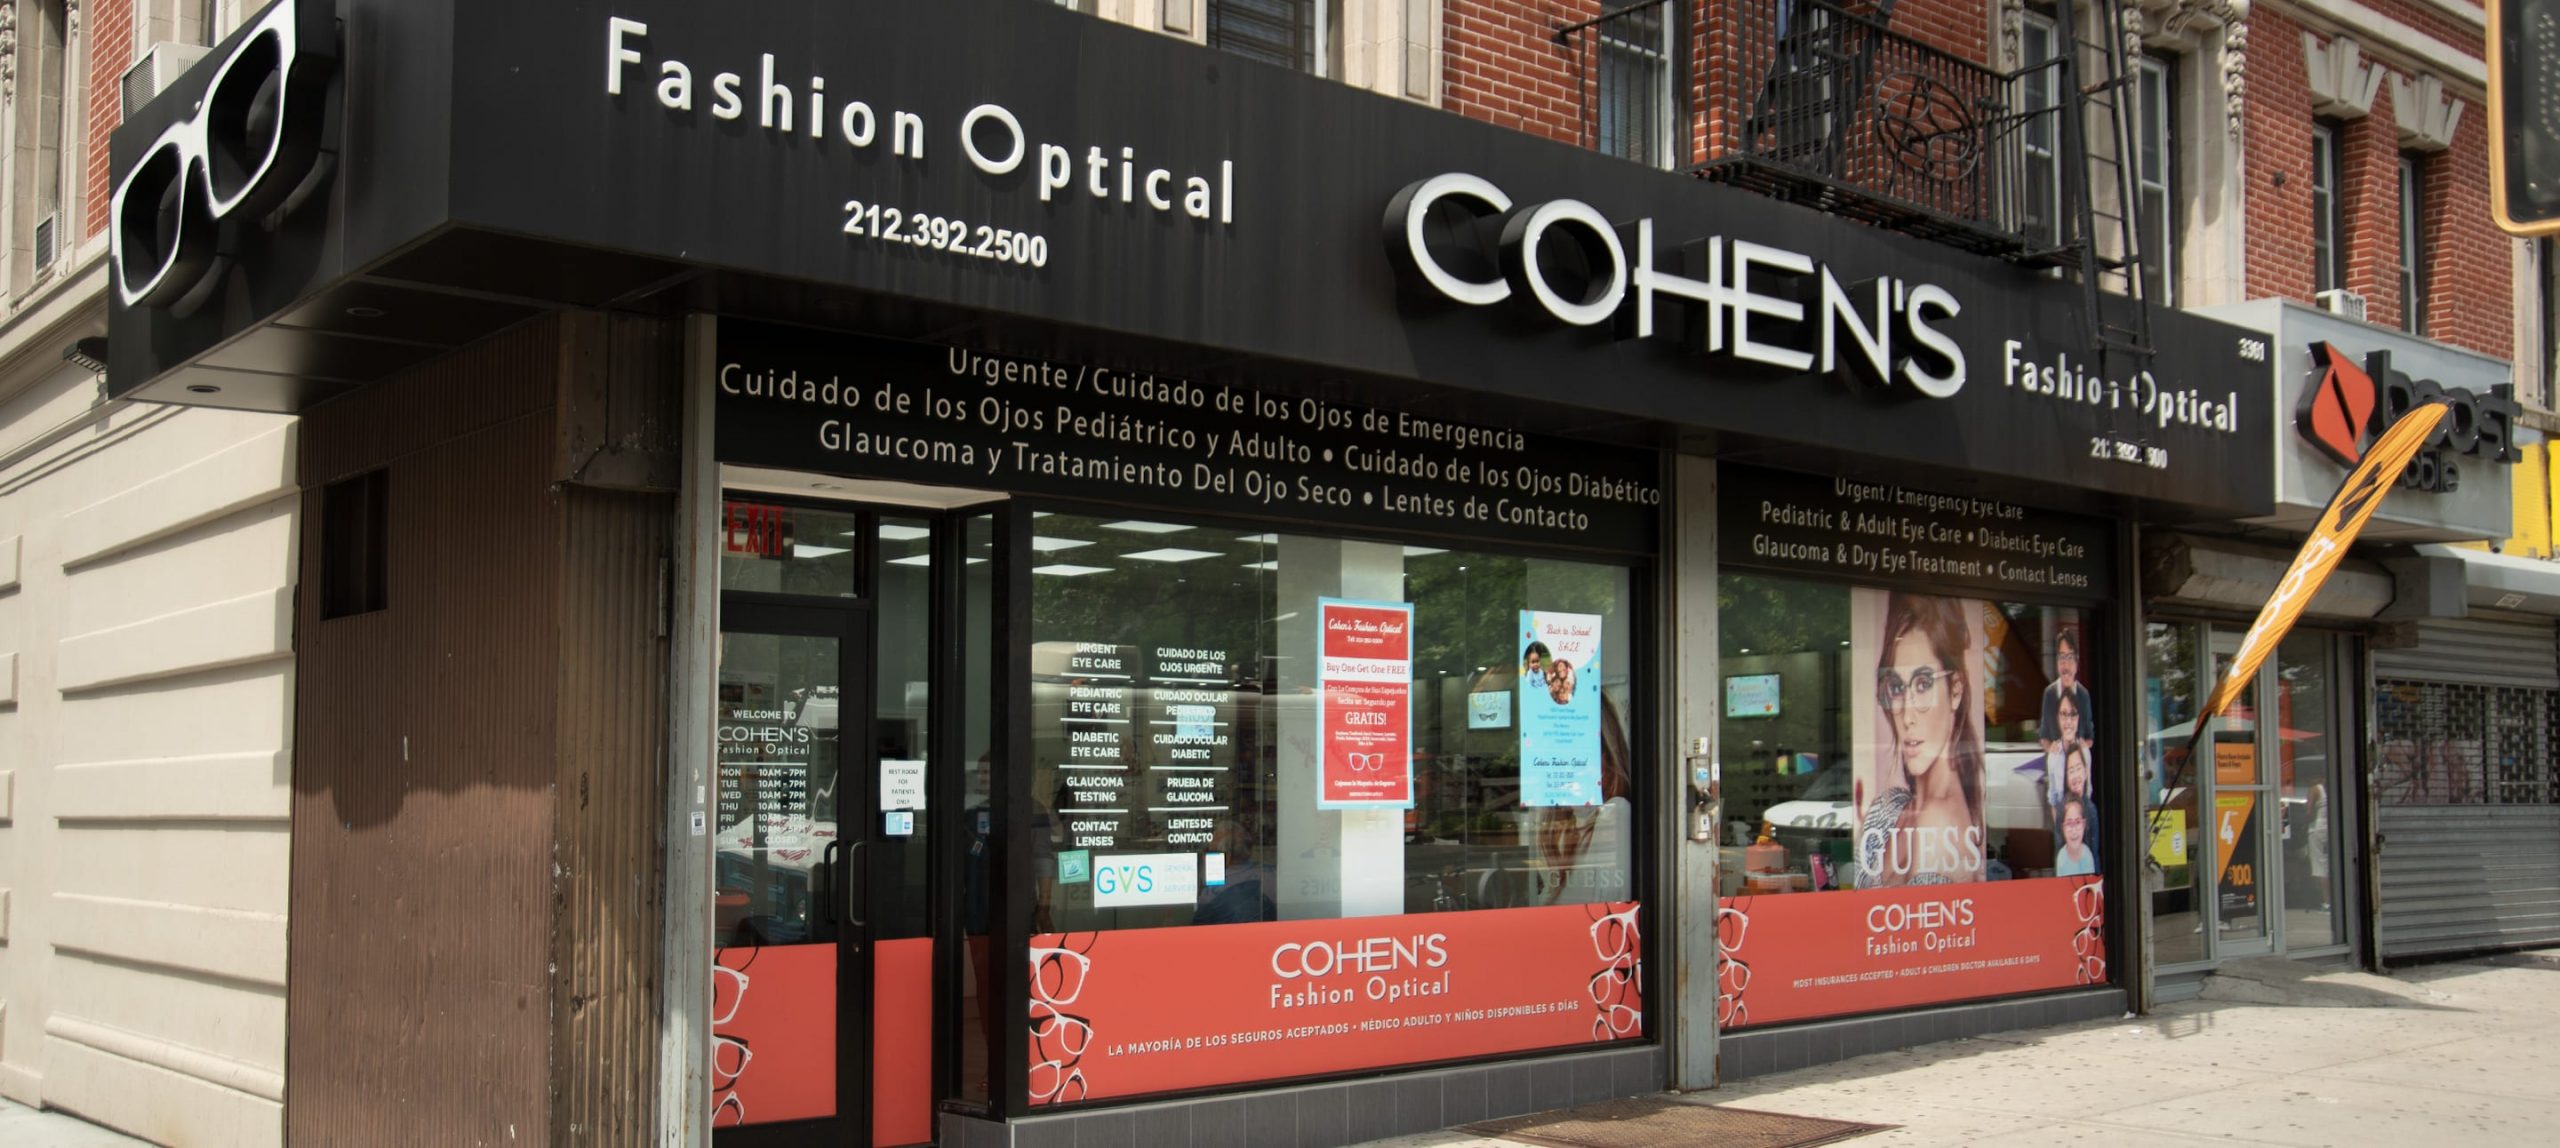 Cohens Fashion Optical Broadway 136th street storefront